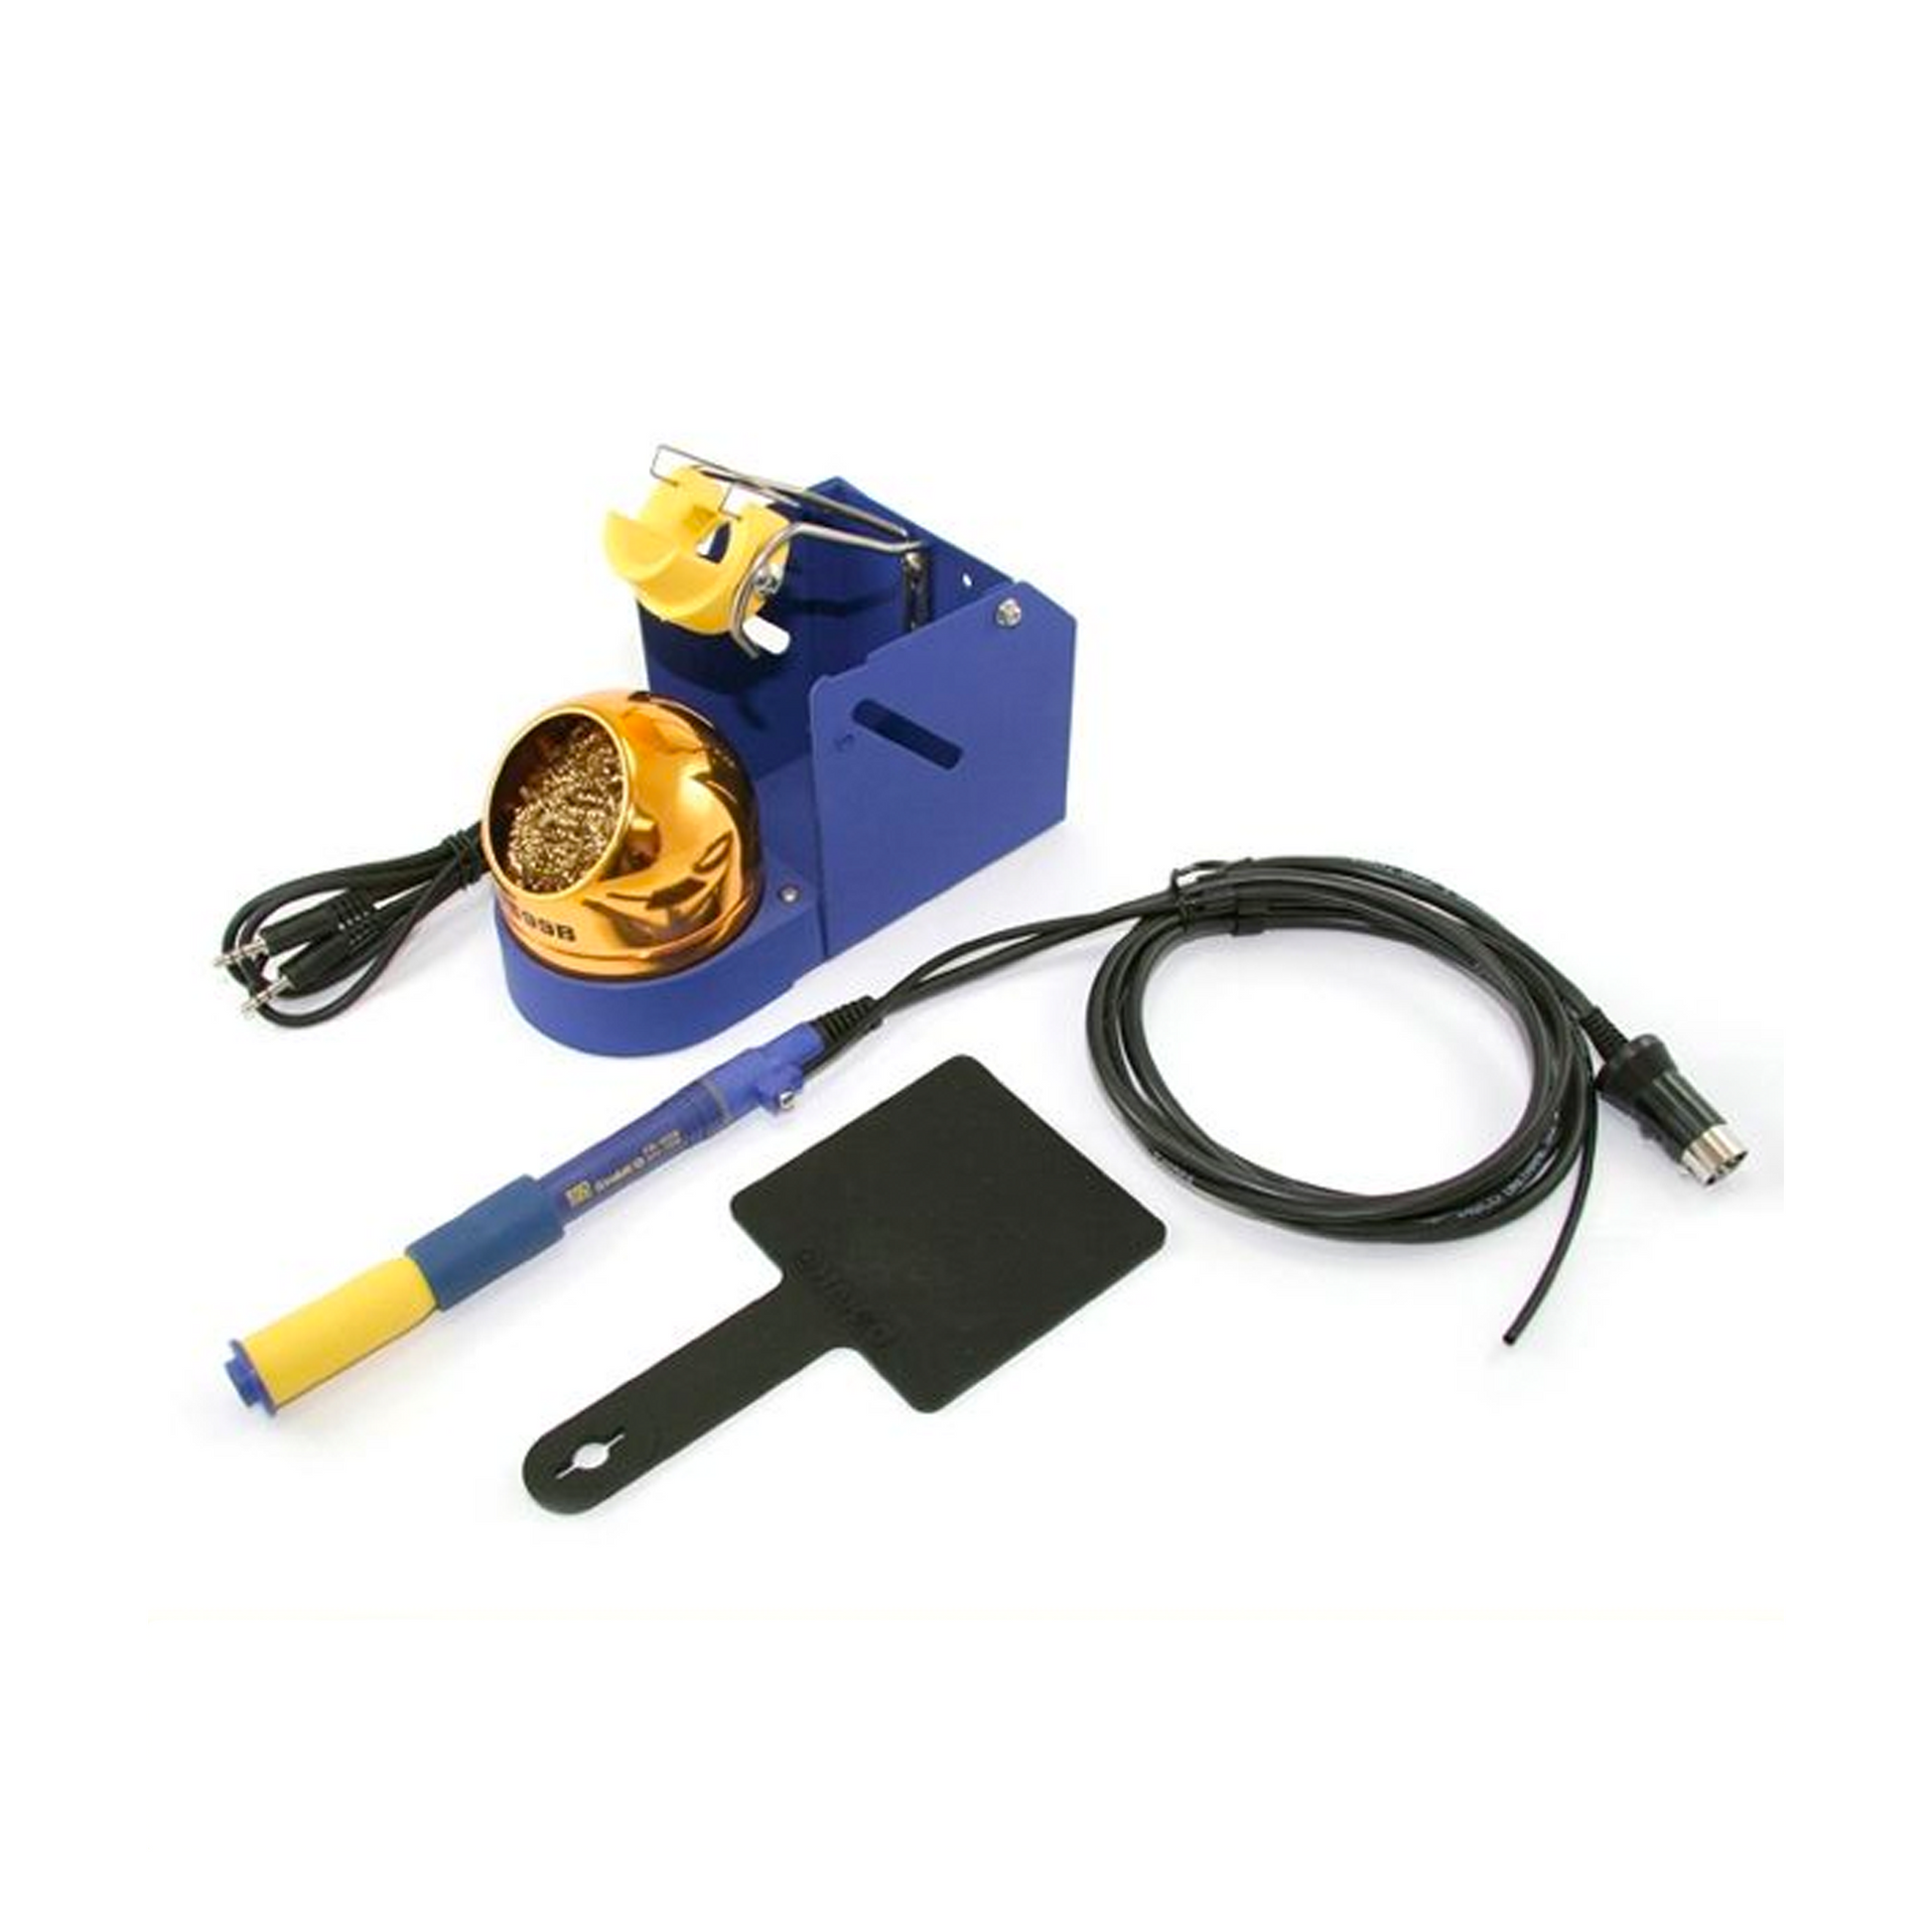 Hakko soldering iron FM2026 conversion kit N2 soldering with nozzle for PCB SMT assembly production line. consist of soldering iron holder with brass wire cleaning sponge, soldering iron excluding tip, heat resistant pad, cable